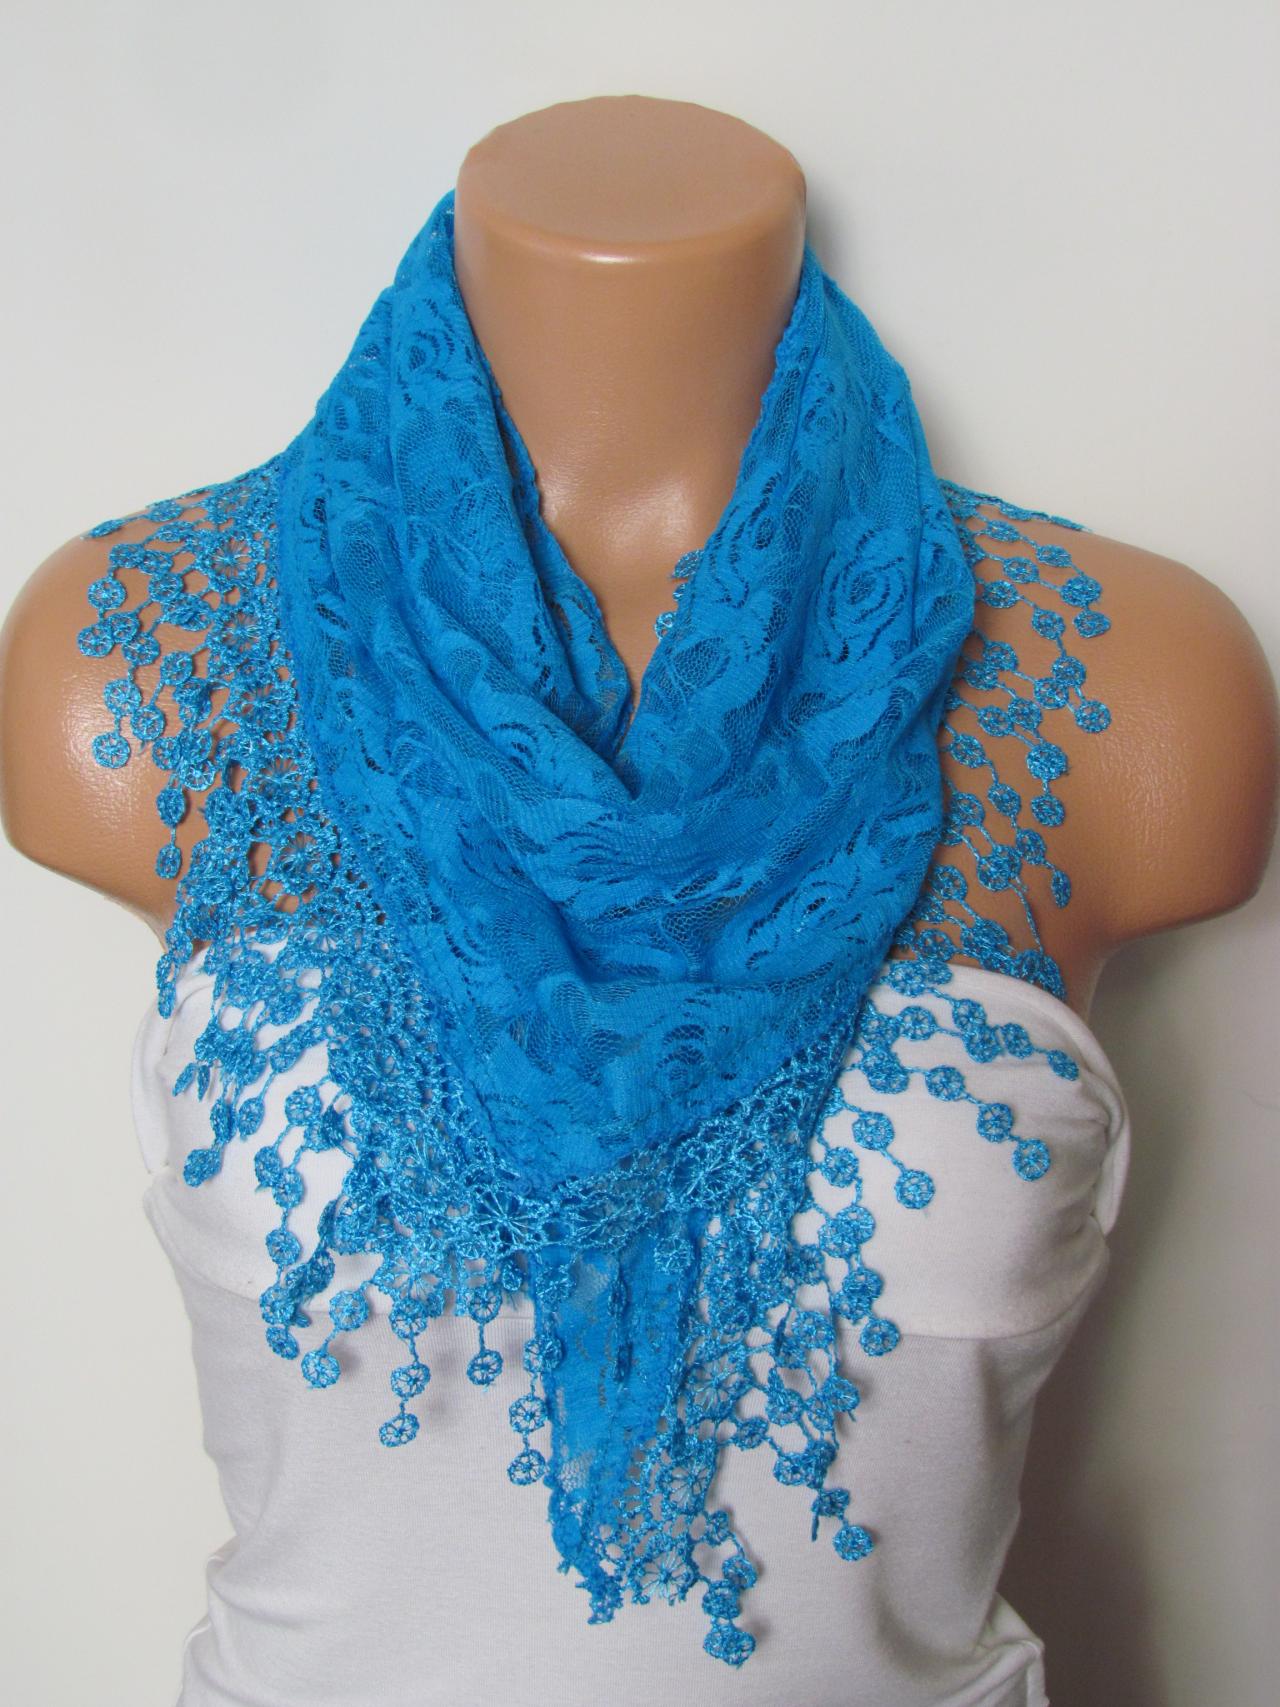 Blue Long Scarf With Fringe-Winter Fashion Scarf-Headband-Necklace- Infinity Scarf- Winter Accessory-Long Scarf